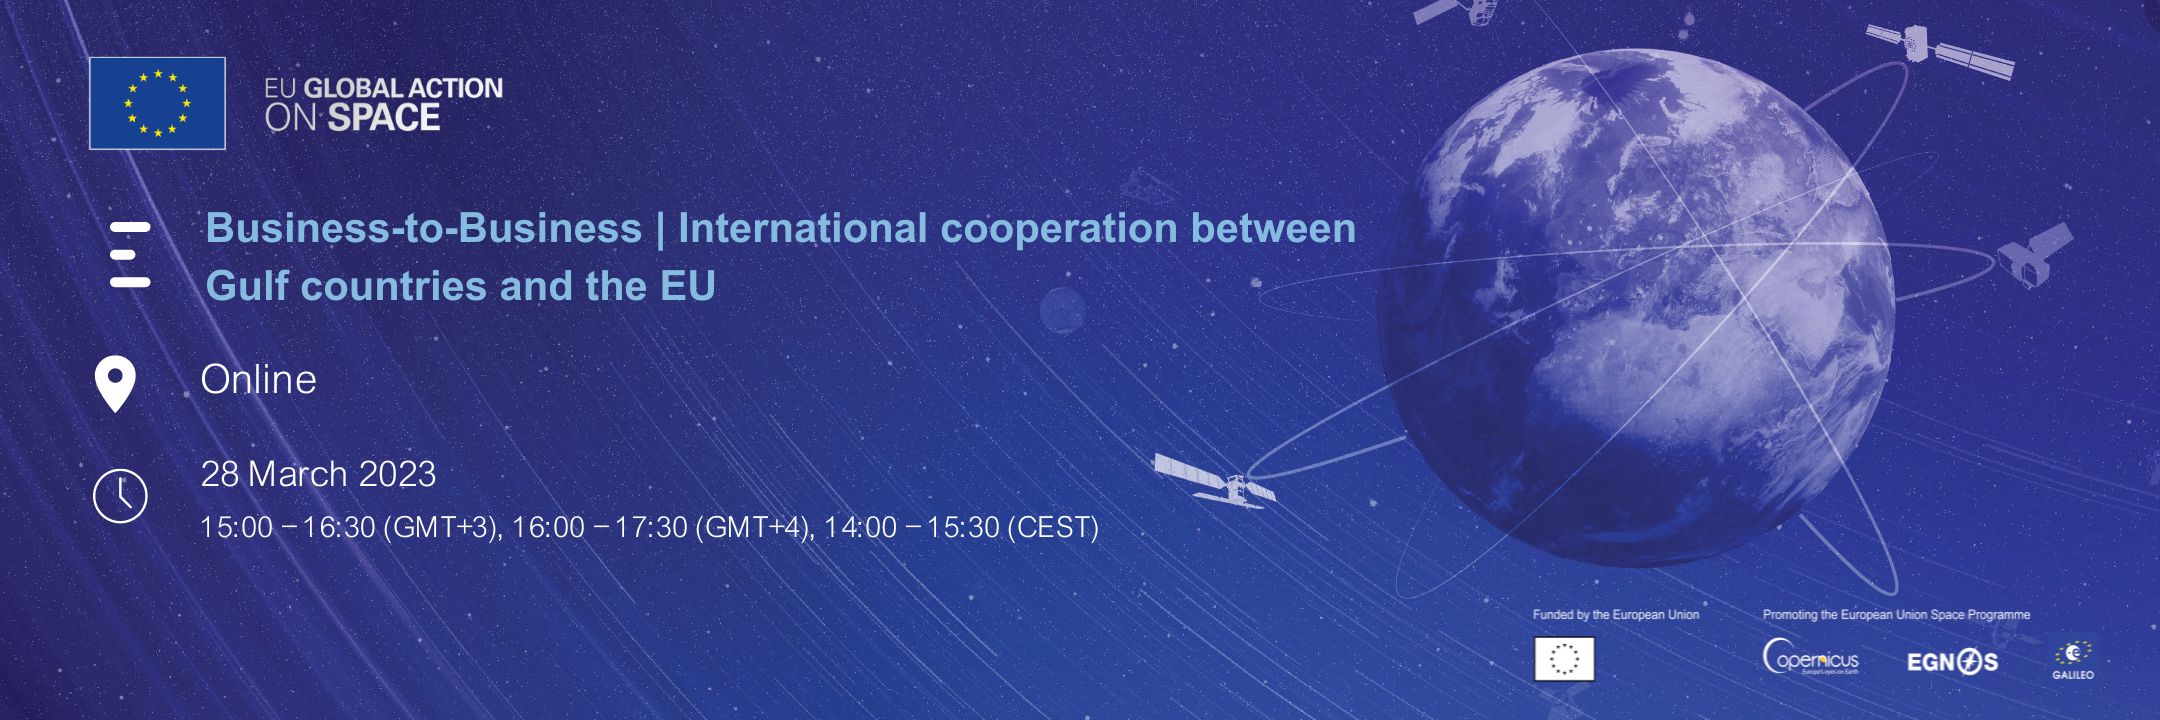 B2B - International cooperation between Gulf countries and the EU